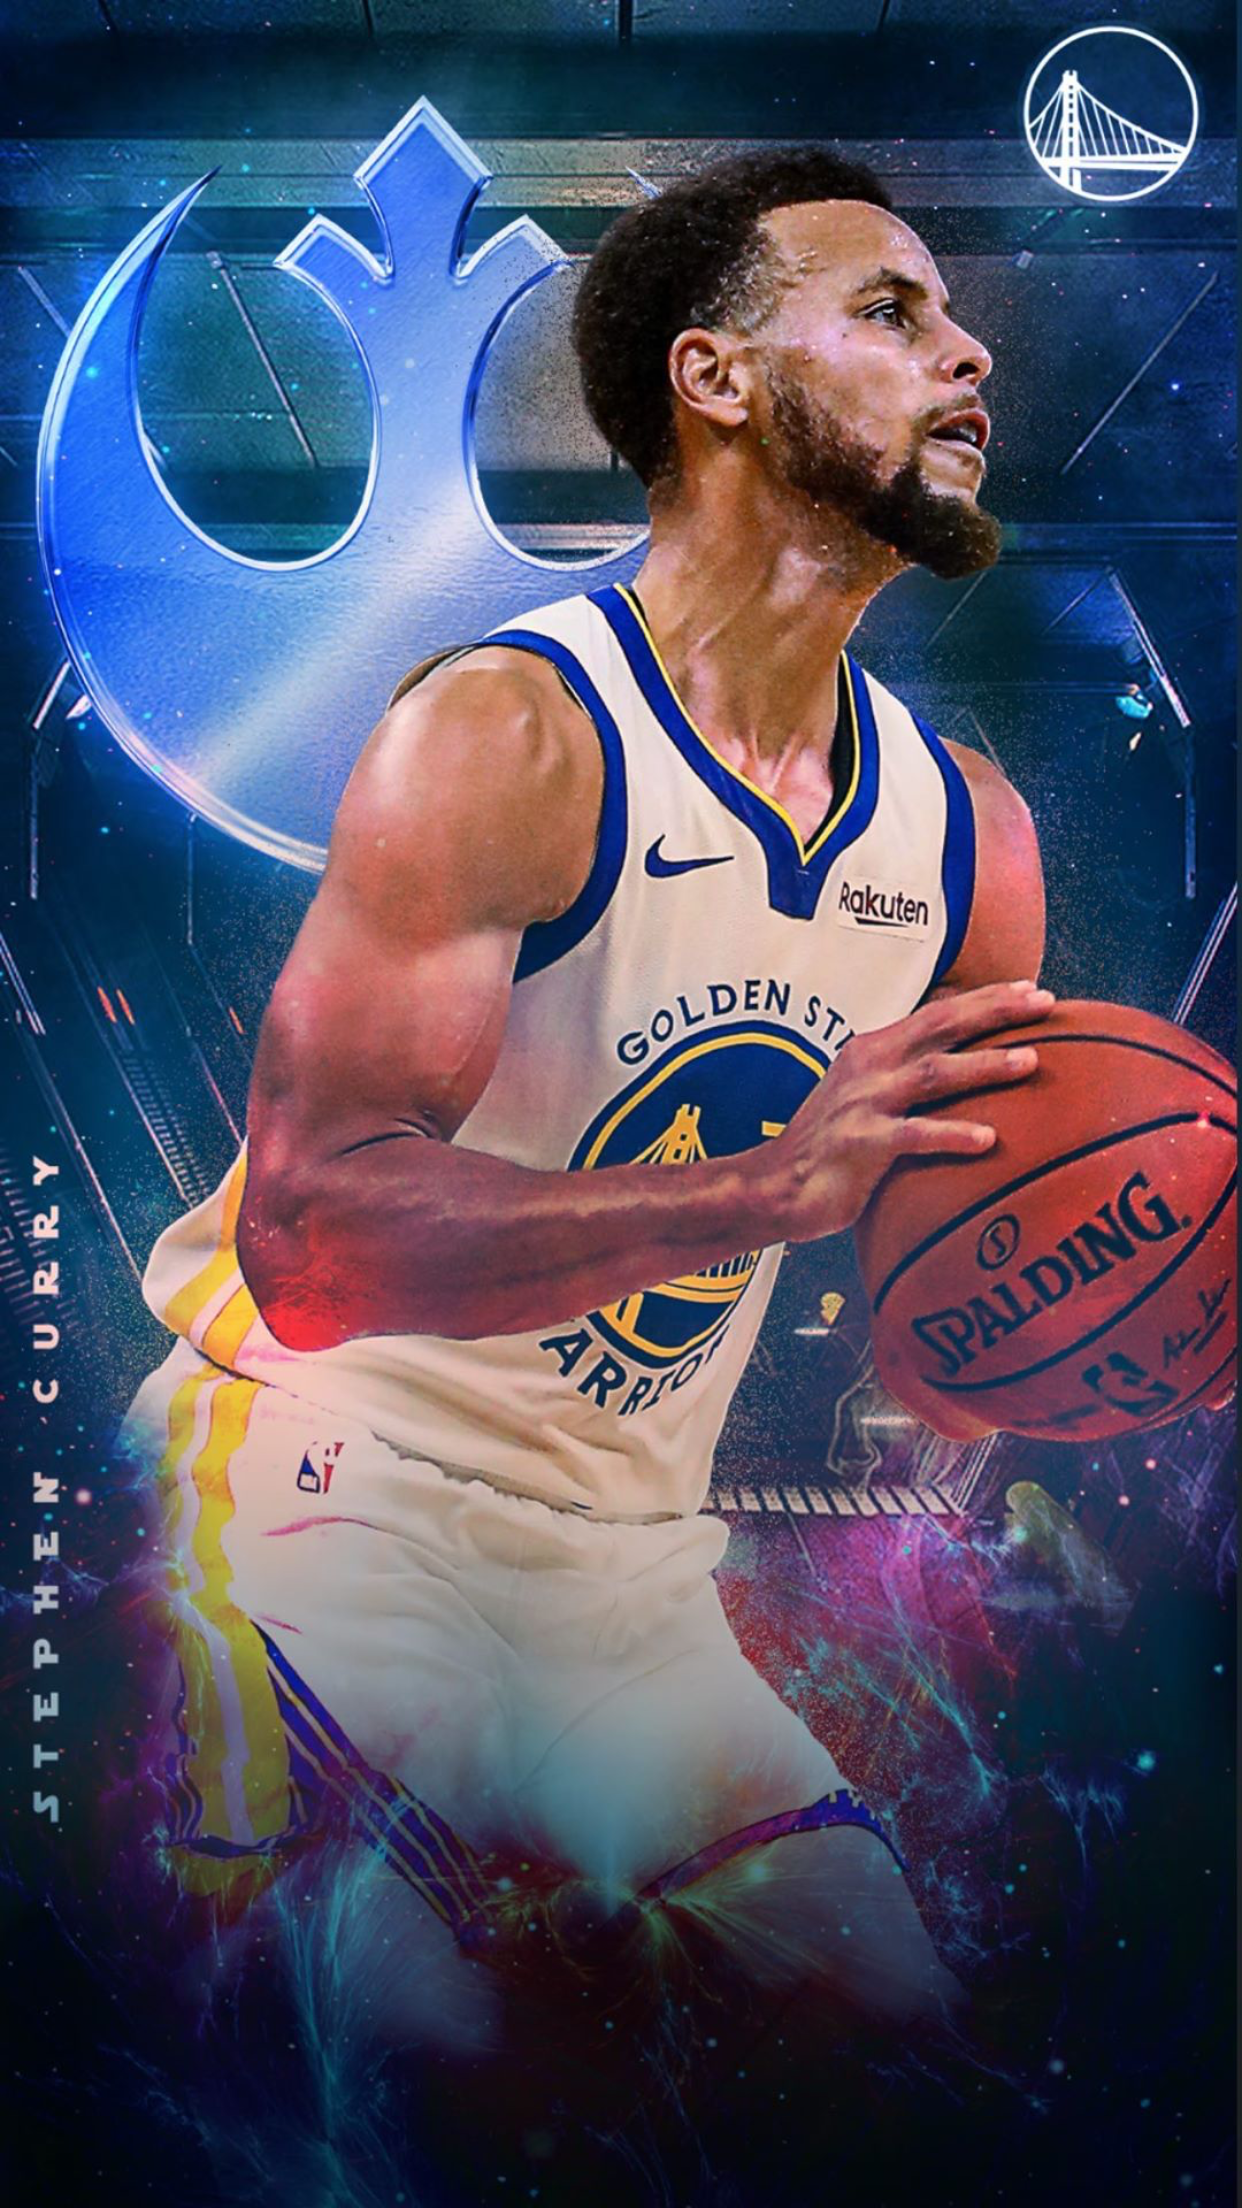 Stephen Curry. Stephen curry wallpaper, Nba wallpaper stephen curry, Curry wallpaper